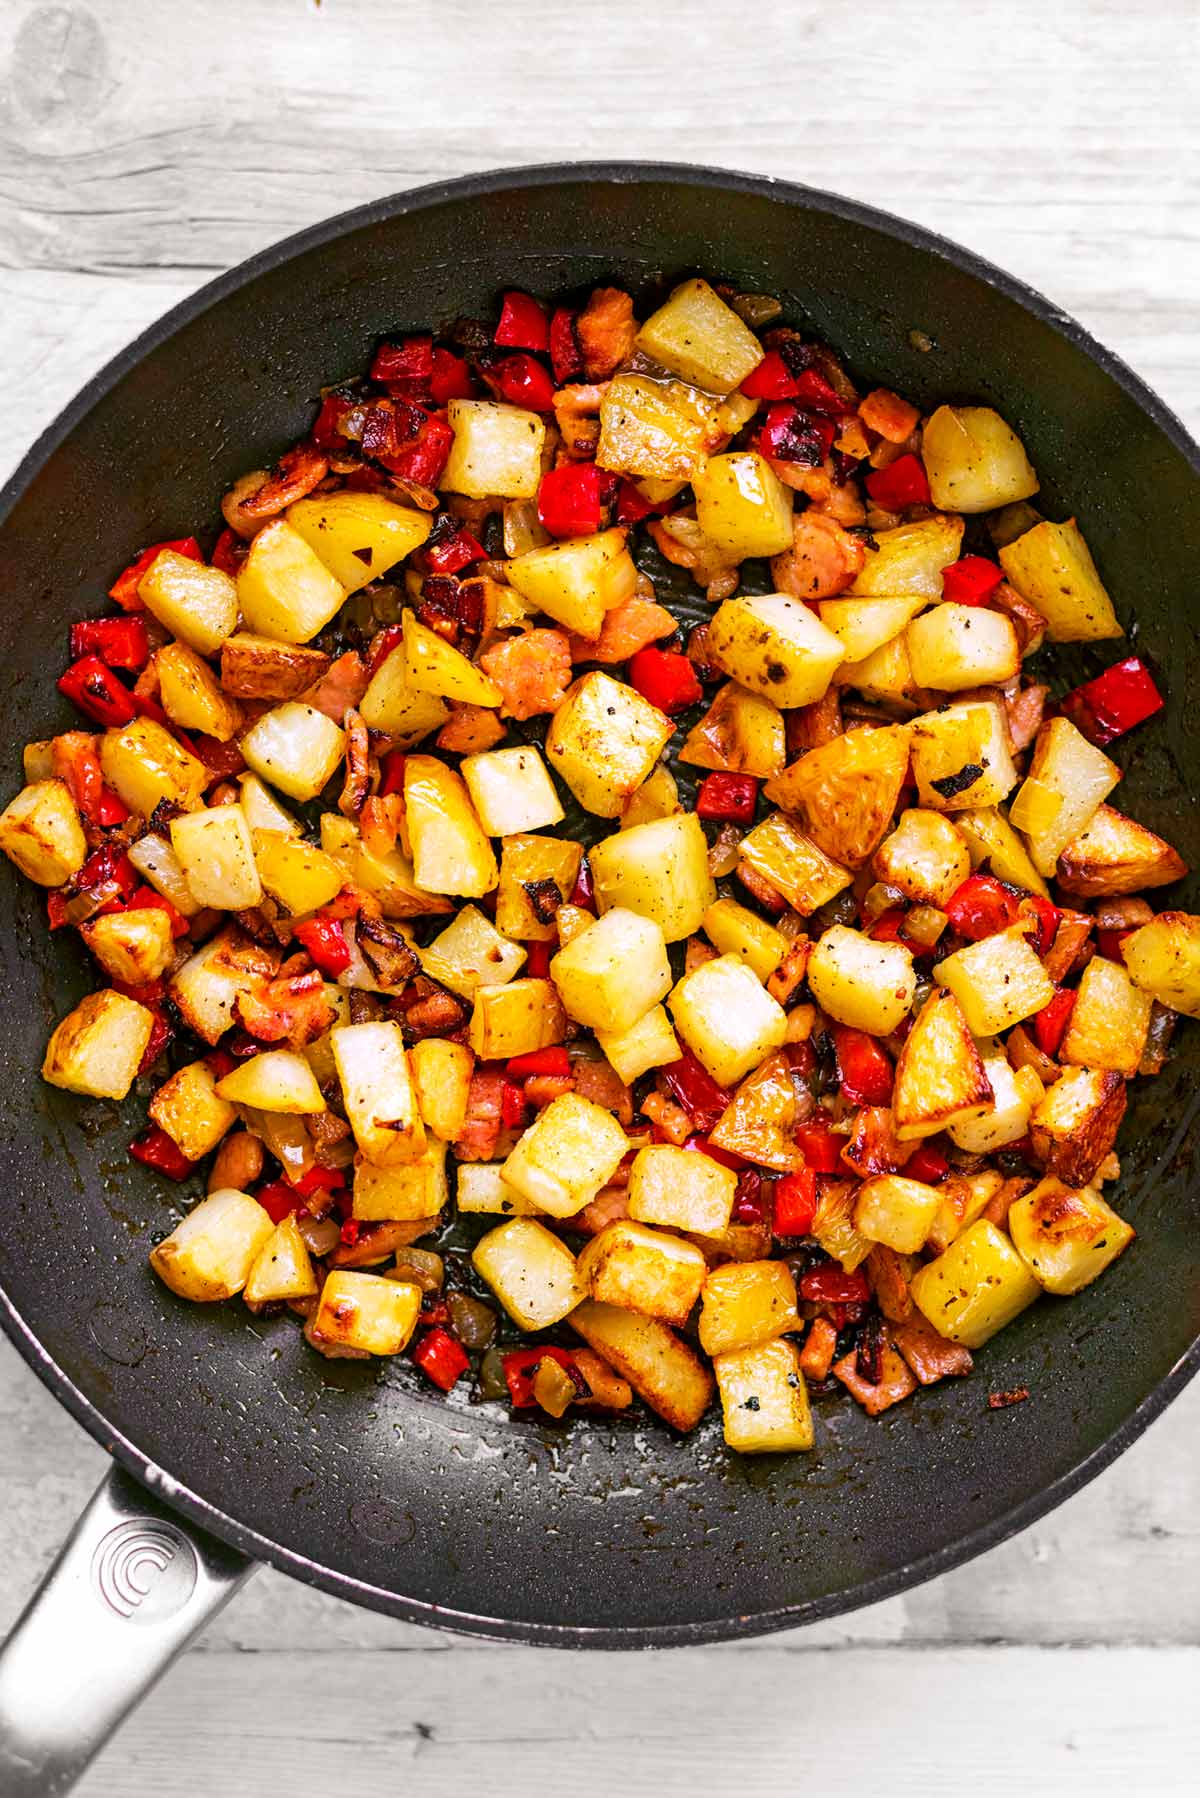 A frying pan with cubed potatoes, vegetables, bacon and spices cooking in it.